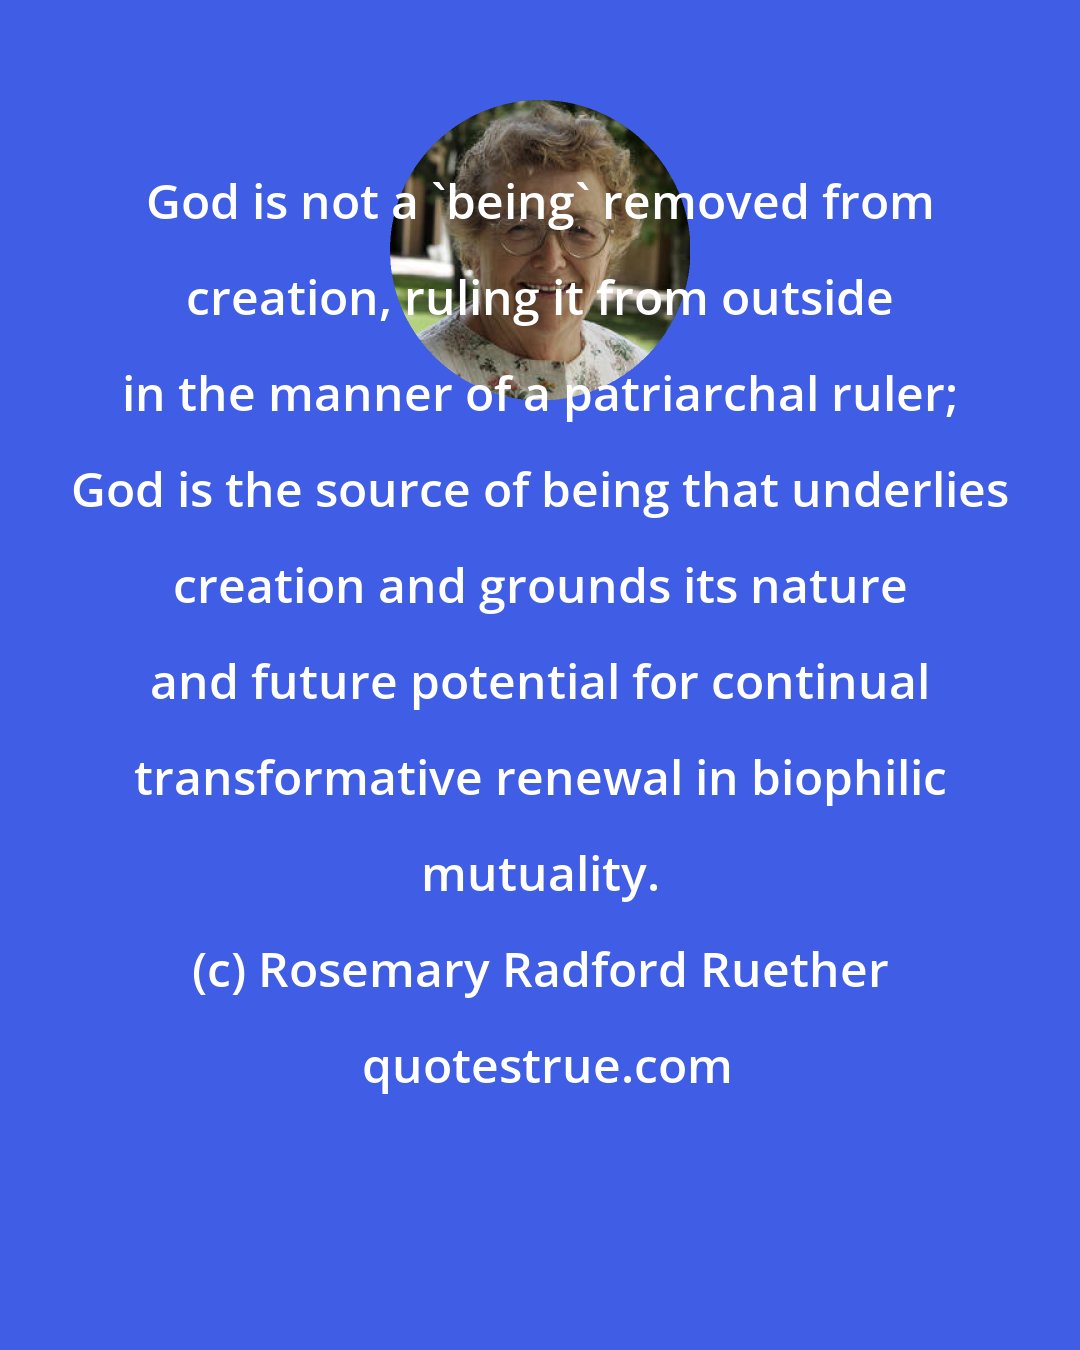 Rosemary Radford Ruether: God is not a 'being' removed from creation, ruling it from outside in the manner of a patriarchal ruler; God is the source of being that underlies creation and grounds its nature and future potential for continual transformative renewal in biophilic mutuality.